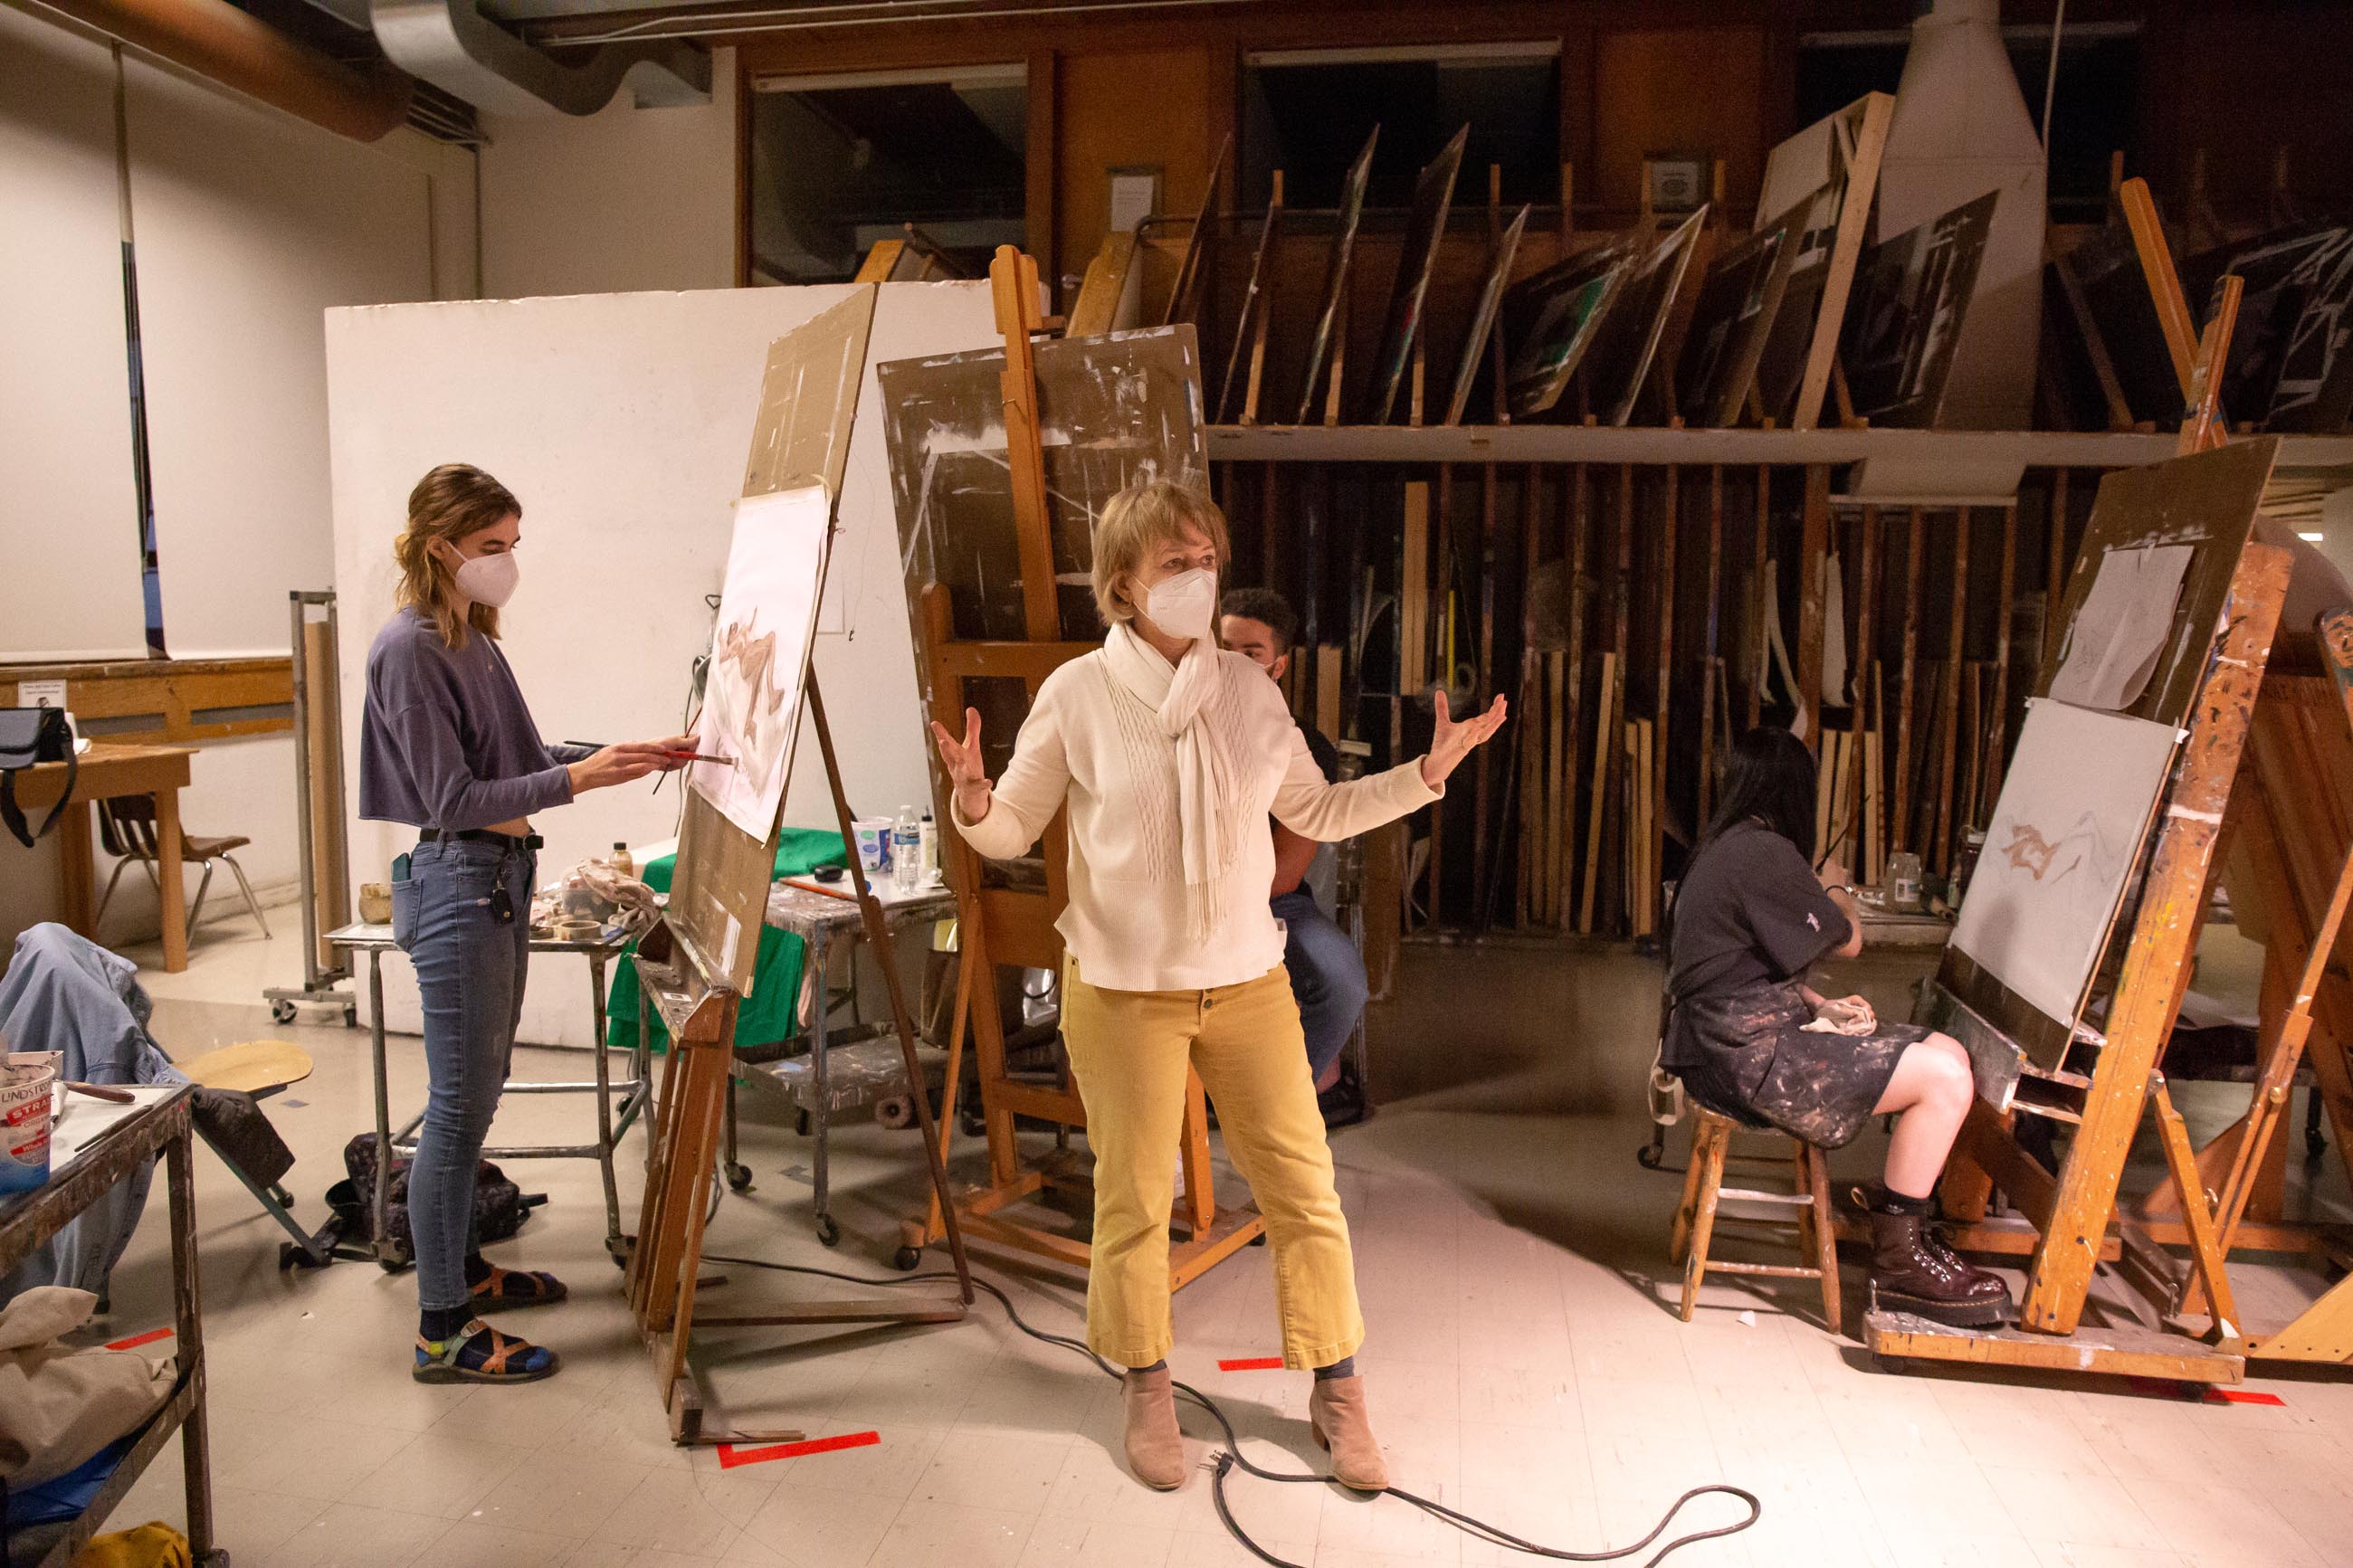 painting instructor in a large studio gesticulates while a painting student paints at an easel